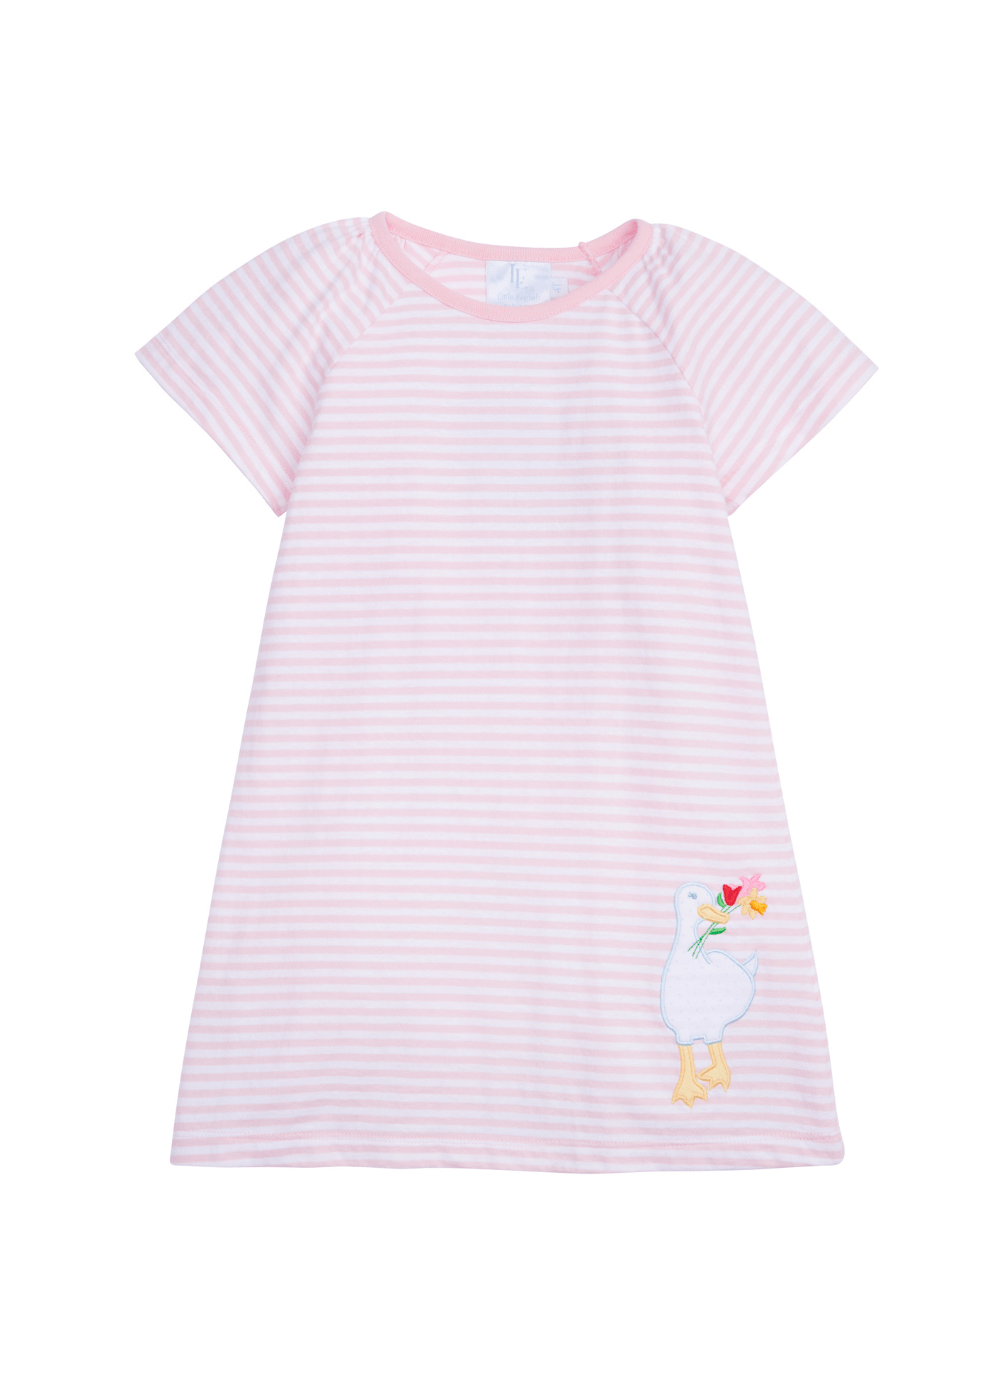 classic childrens clothing girls pink and white striped dress with duck applique